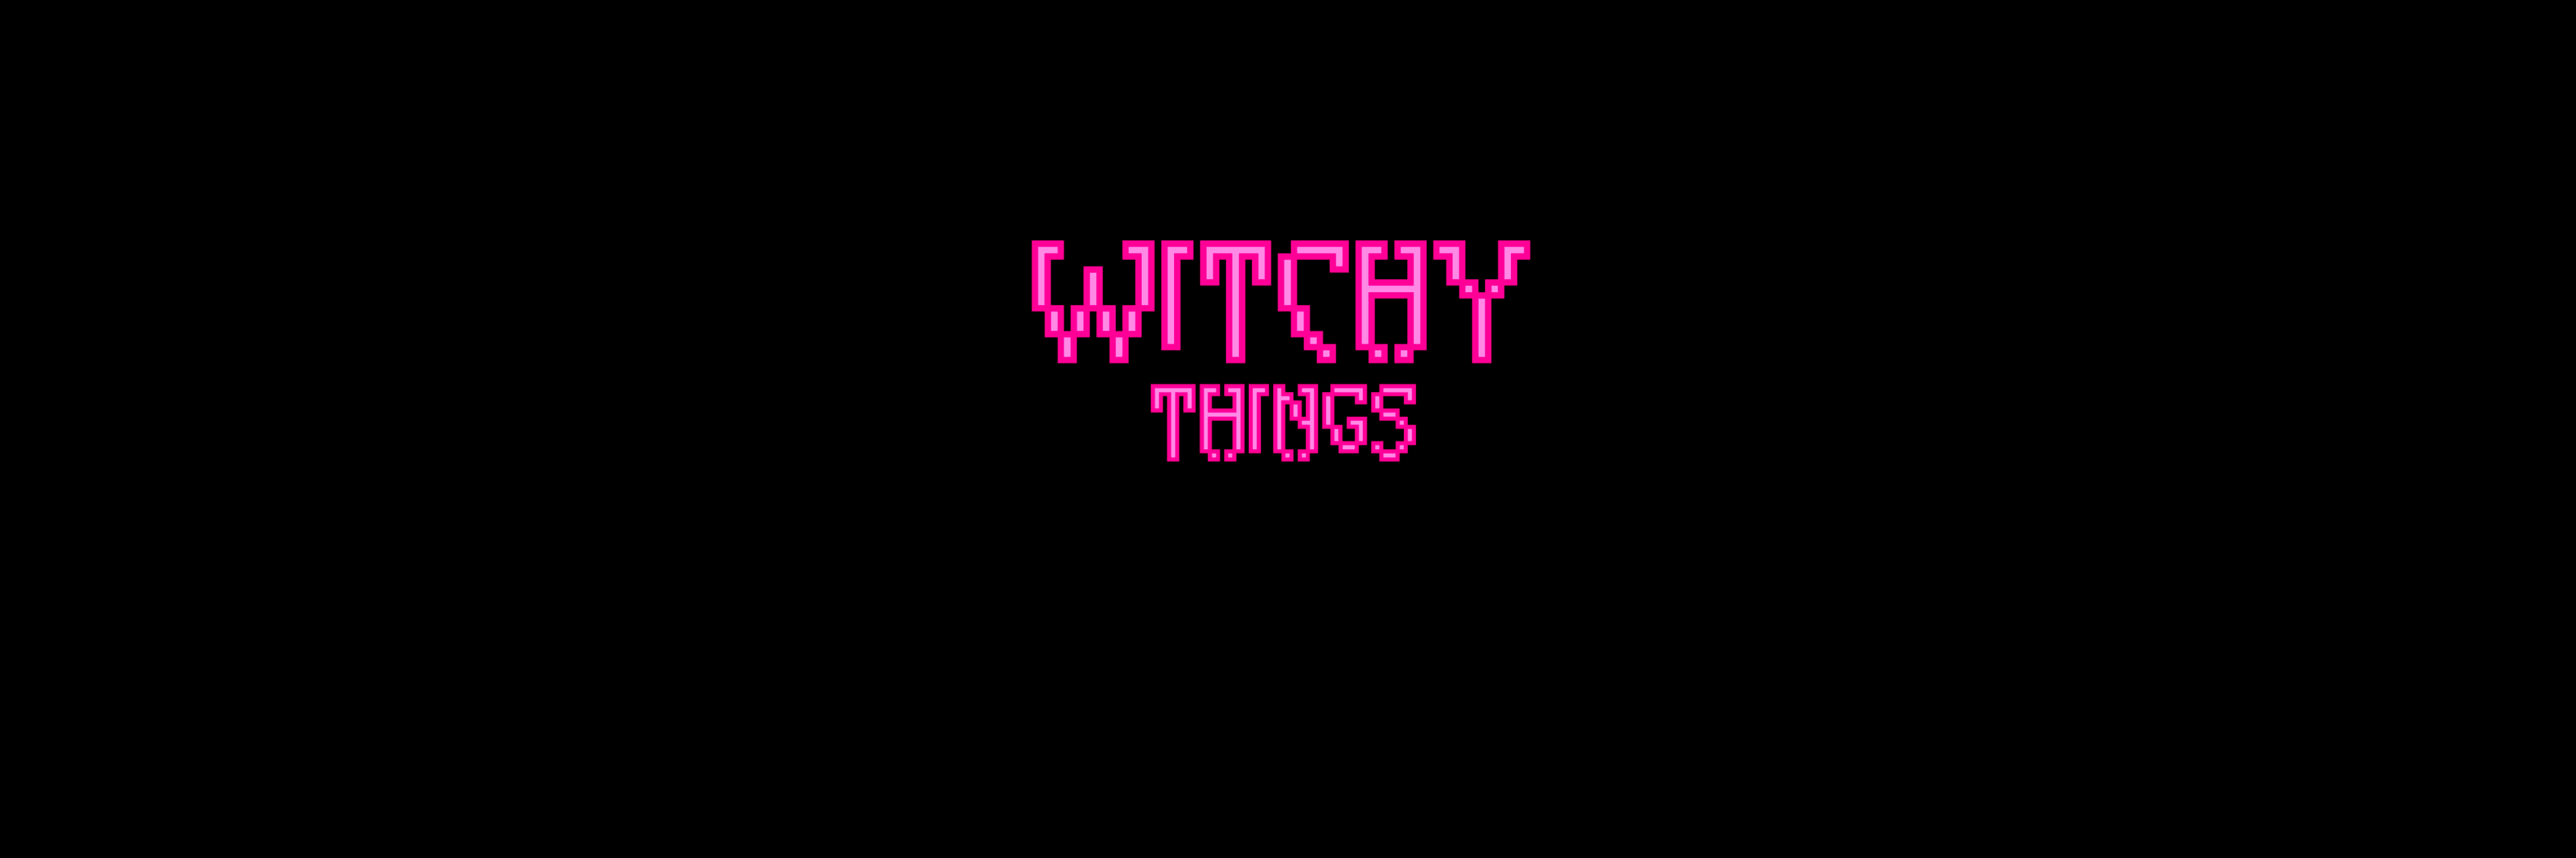 WitchyThingsNFT banner